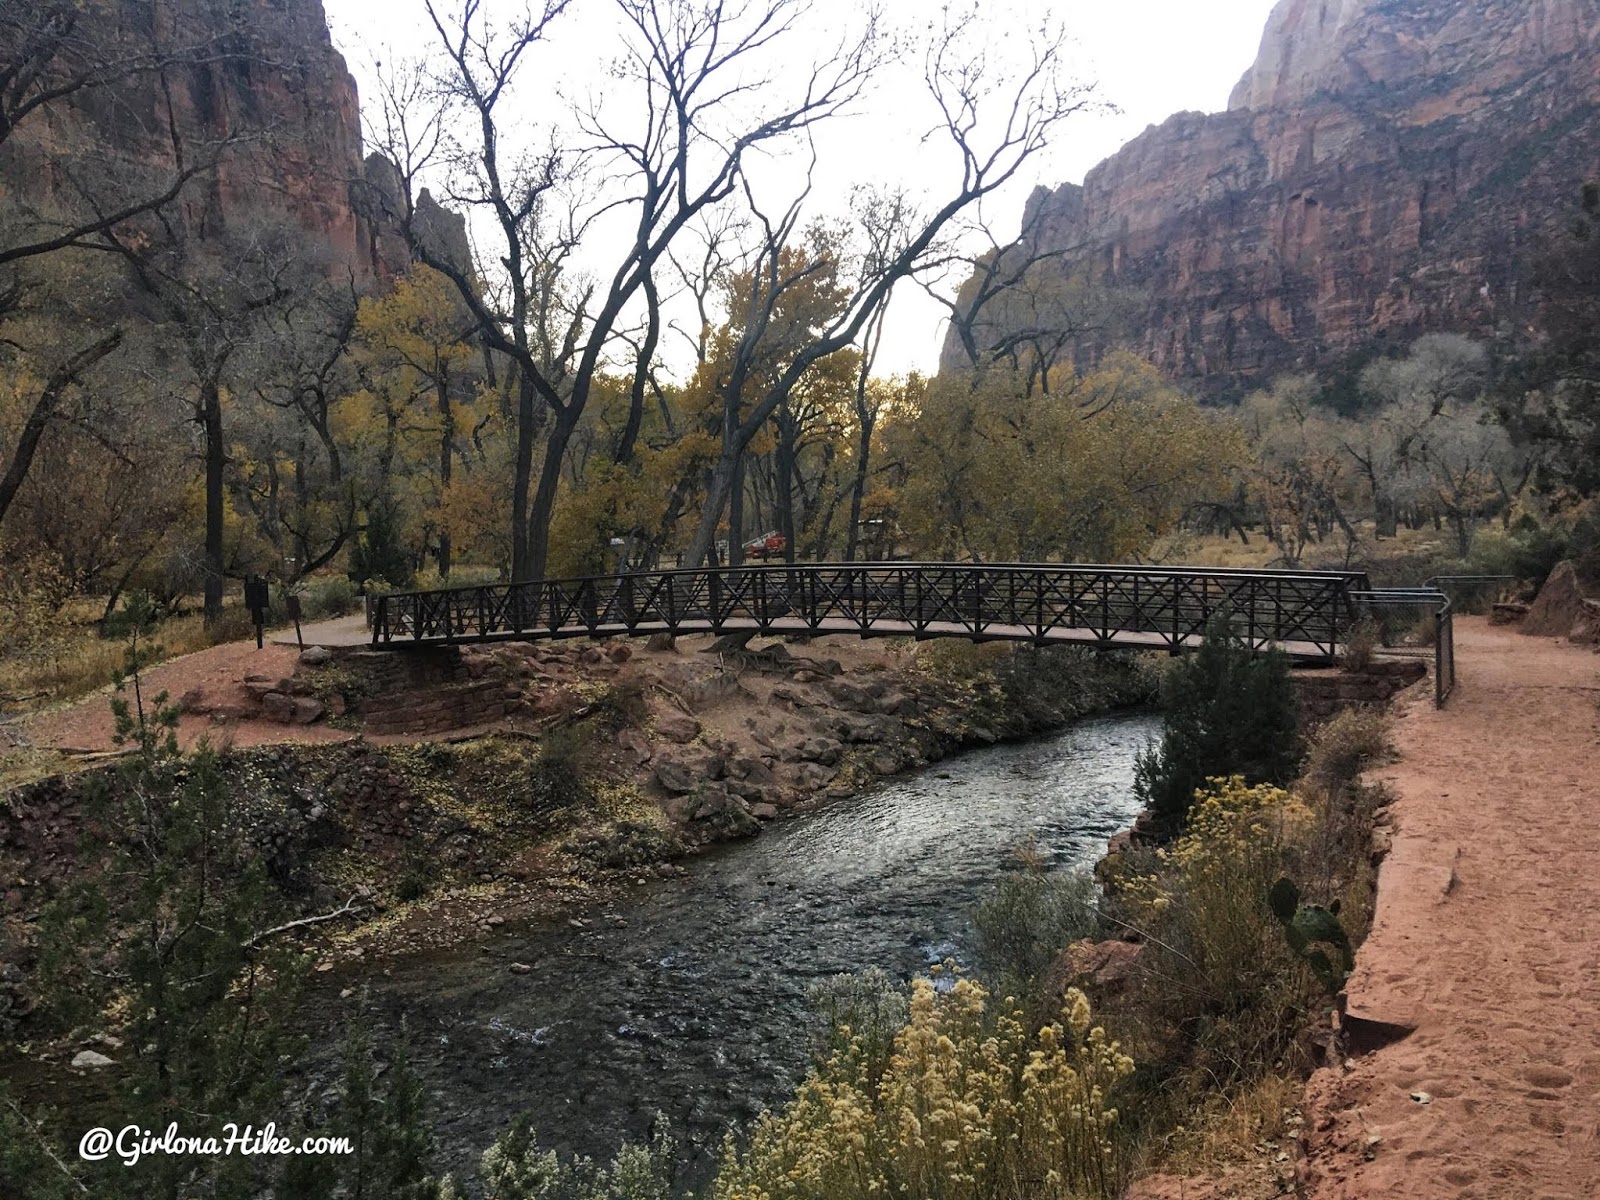 Hiking the West Rim Trail, Zion National Park